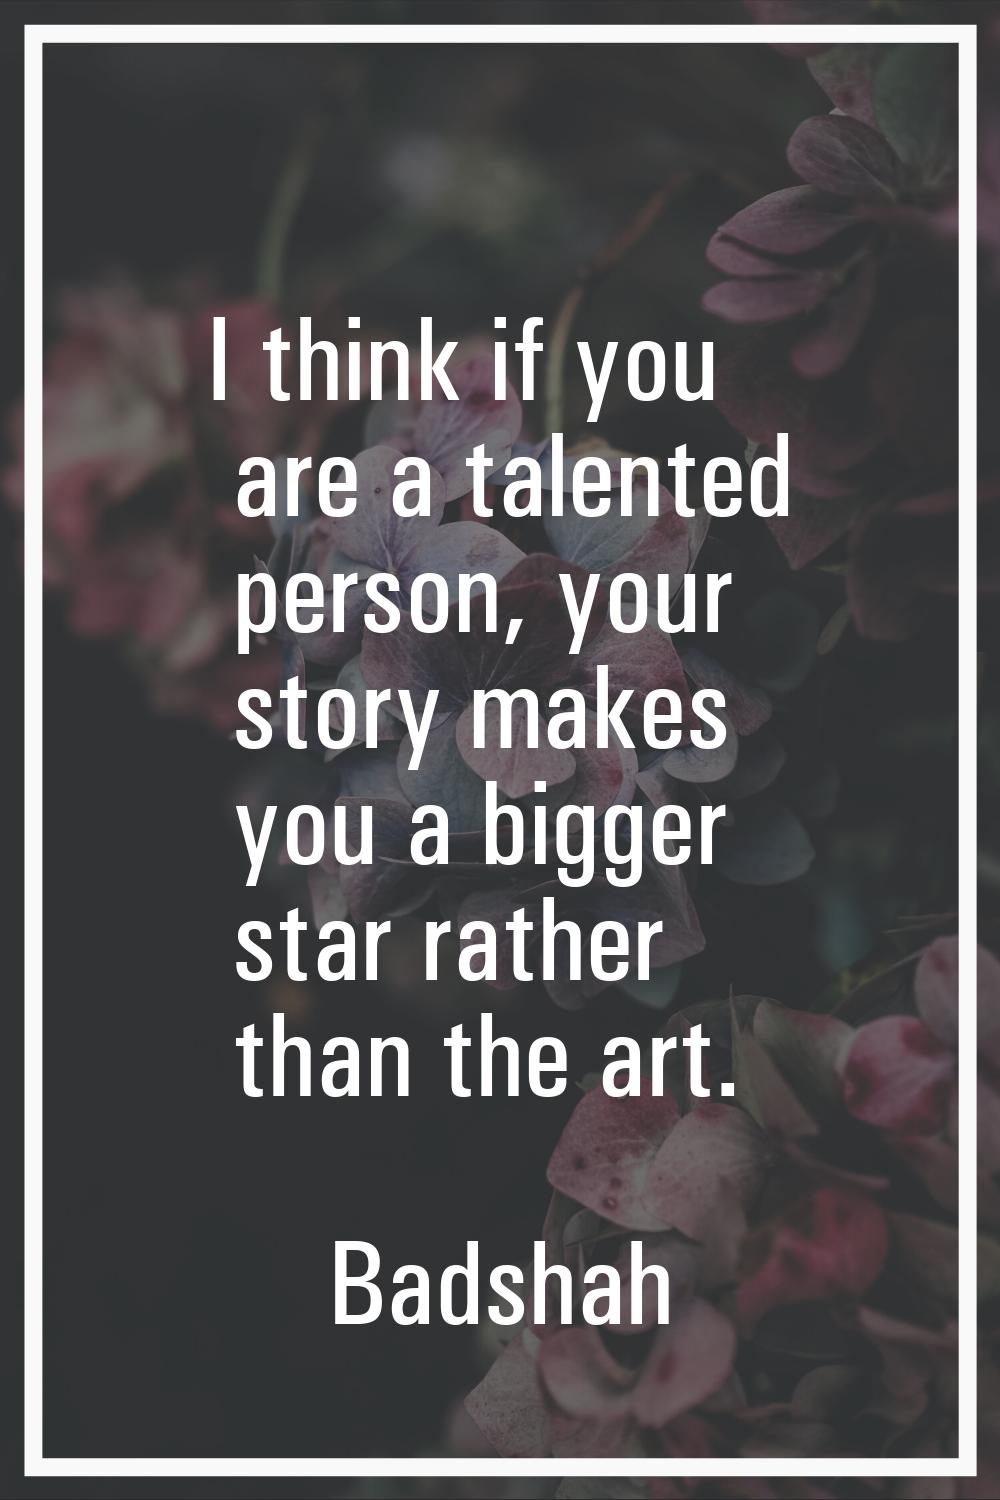 I think if you are a talented person, your story makes you a bigger star rather than the art.